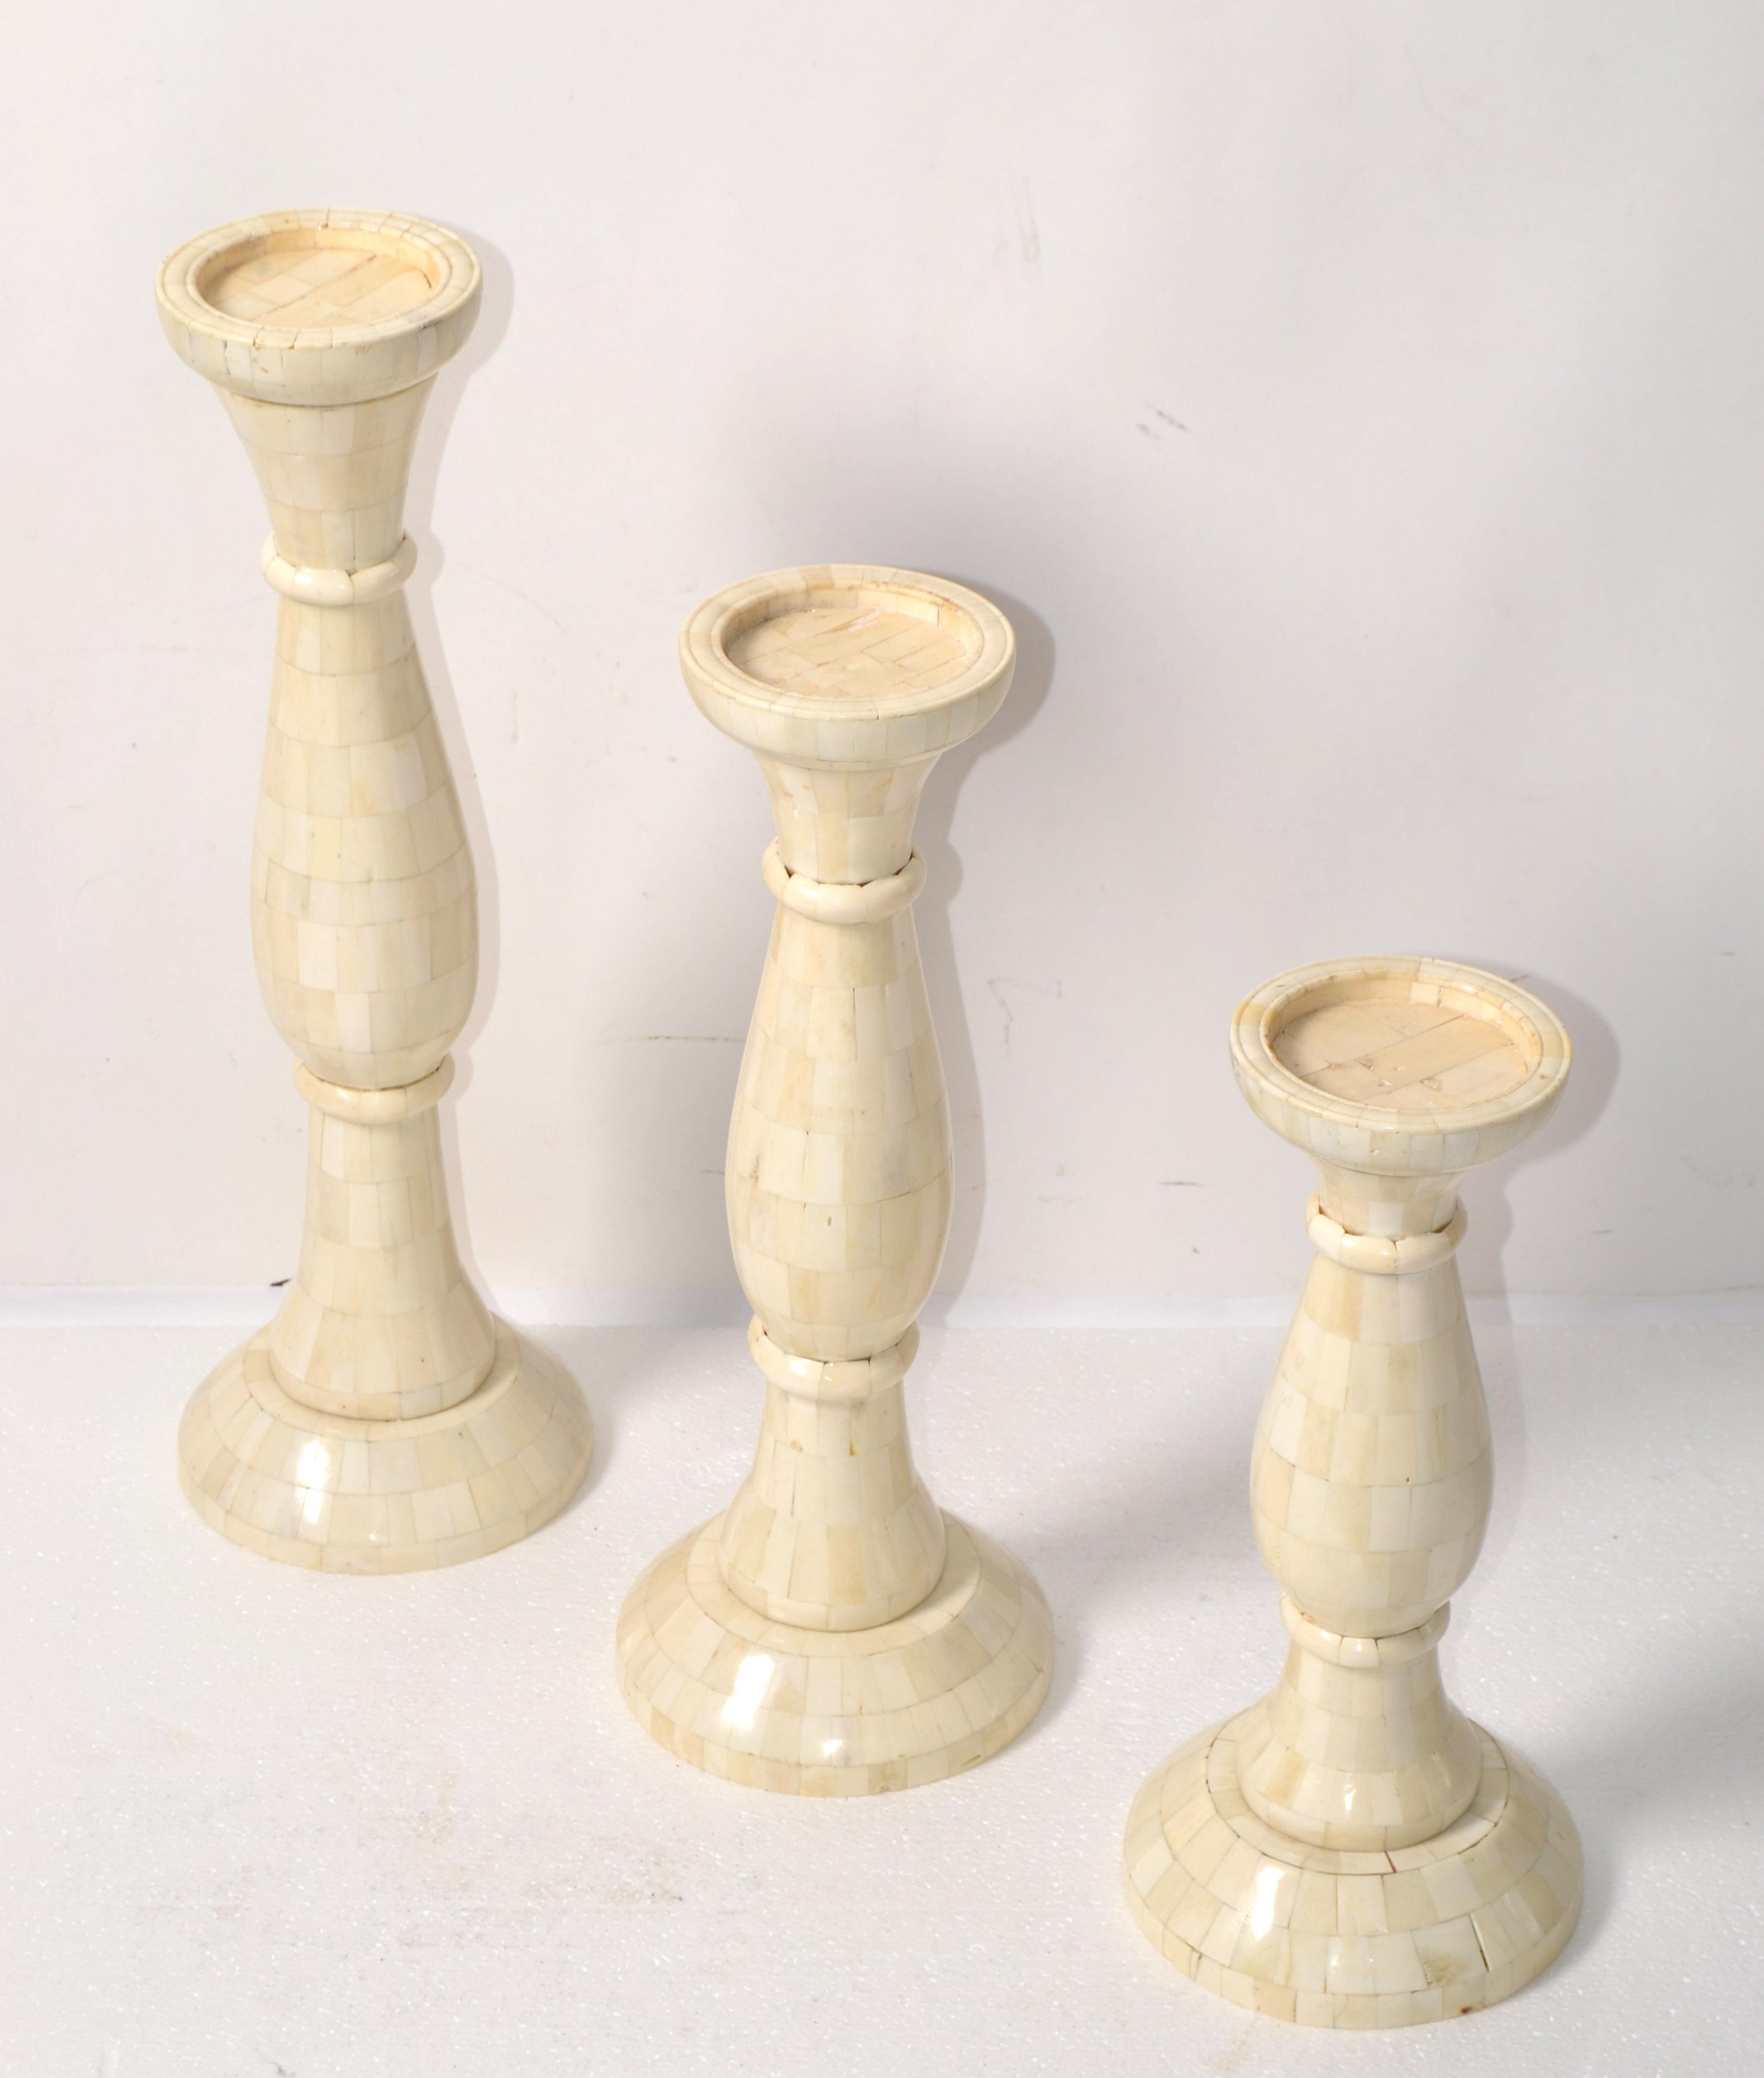 3 Large Nesting Pillar Candle Holders Handmade Mother of Pearl Turned Wood 1970 For Sale 7